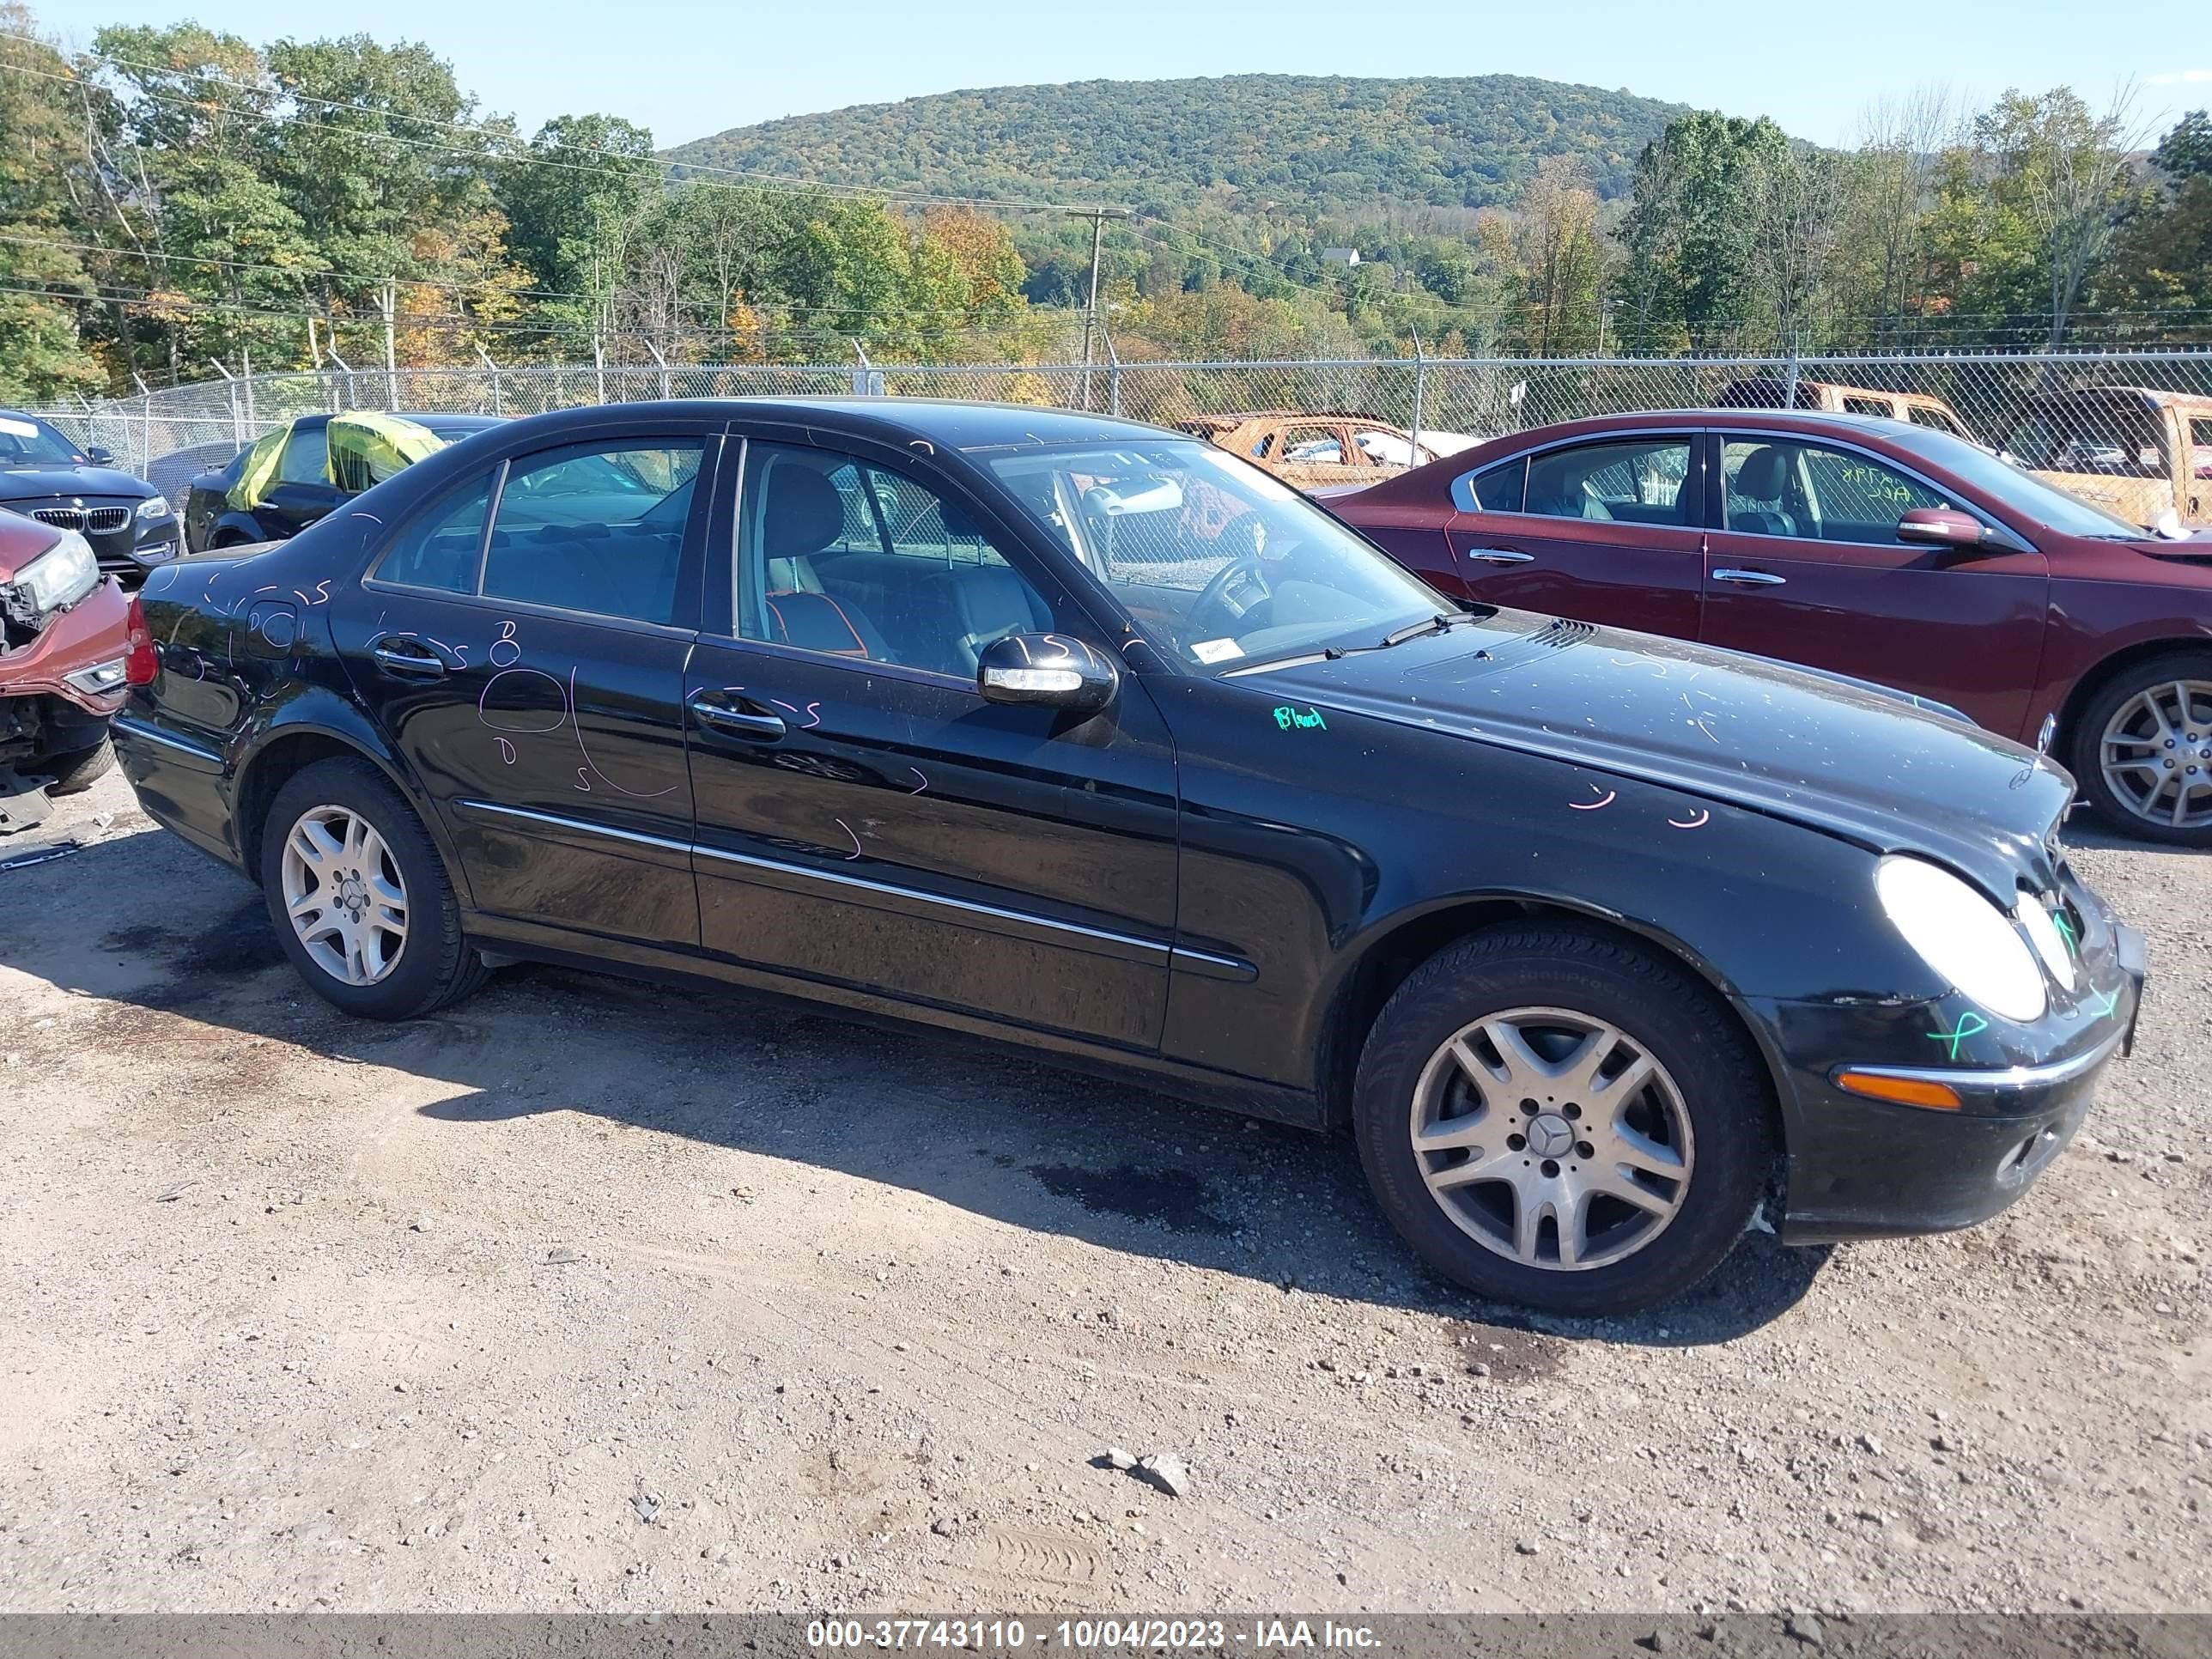 vin: WDBUF26J56A900566 WDBUF26J56A900566 2006 mercedes-benz e-klasse 3200 for Sale in 07865, 985 State Route 57, Port Murray, New Jersey, USA